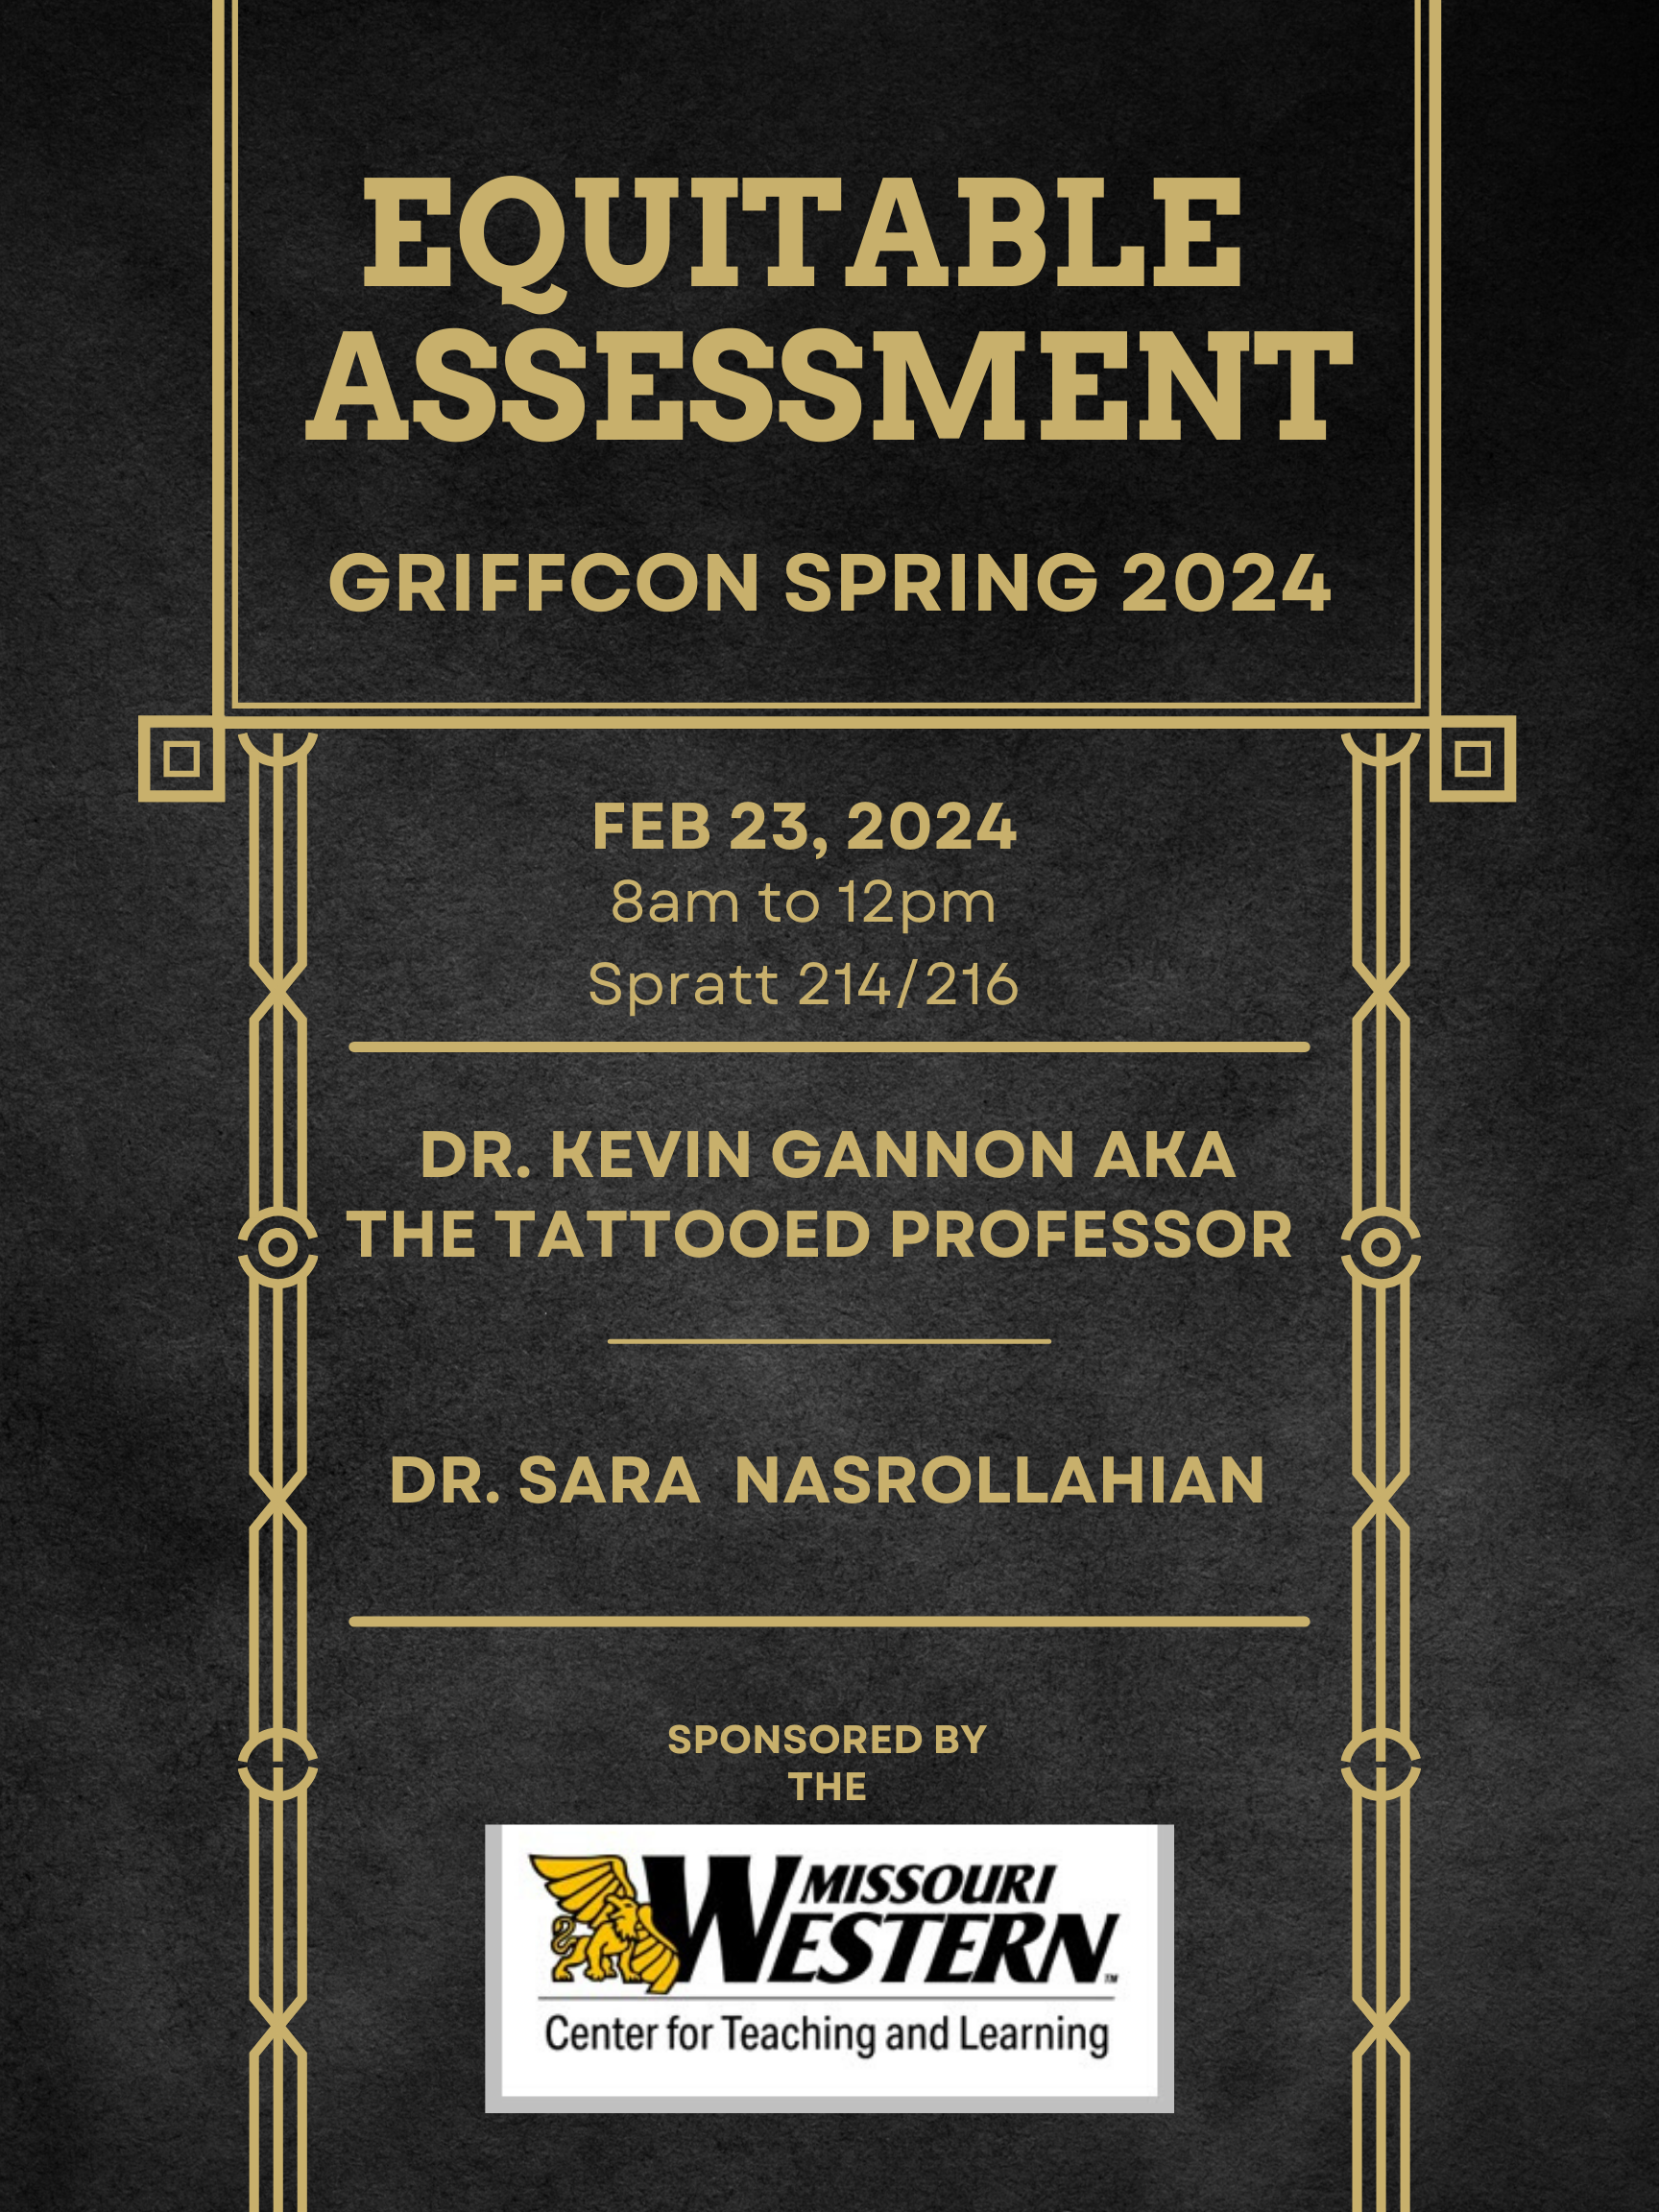 Griff Con 2024 Equitable Assessment